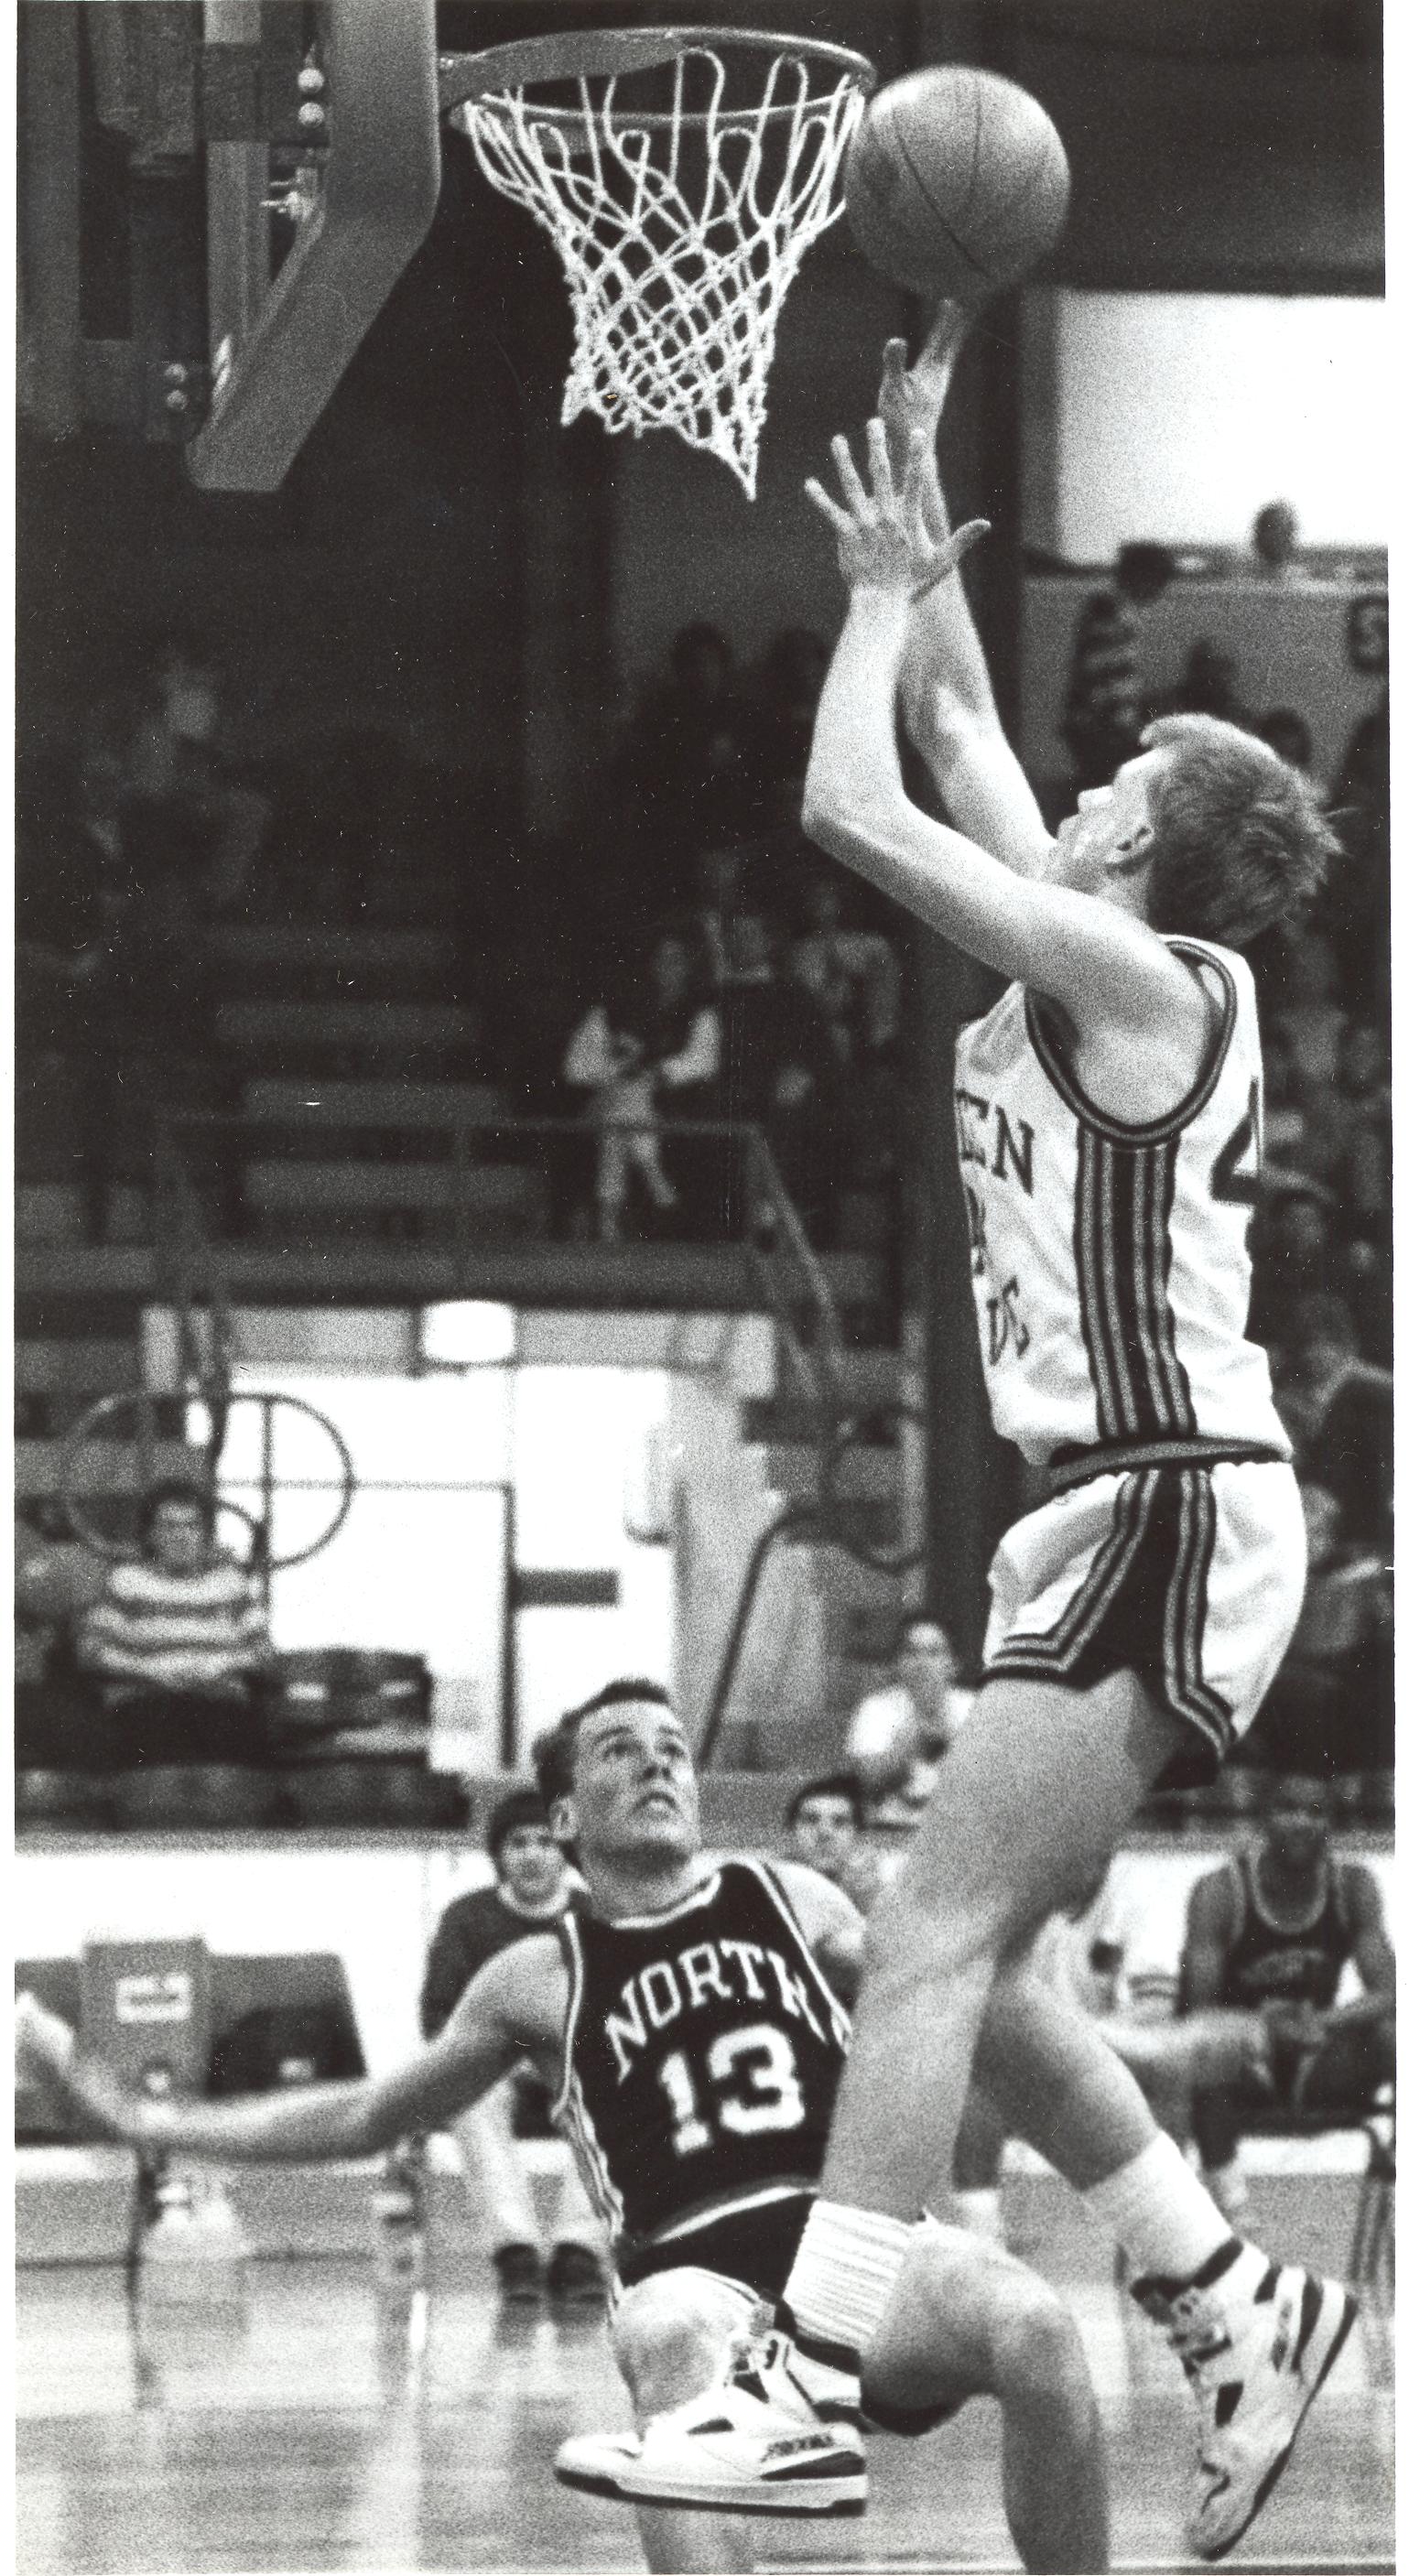 Greenville shoots for two at the 1989 boy's tournament in Troy